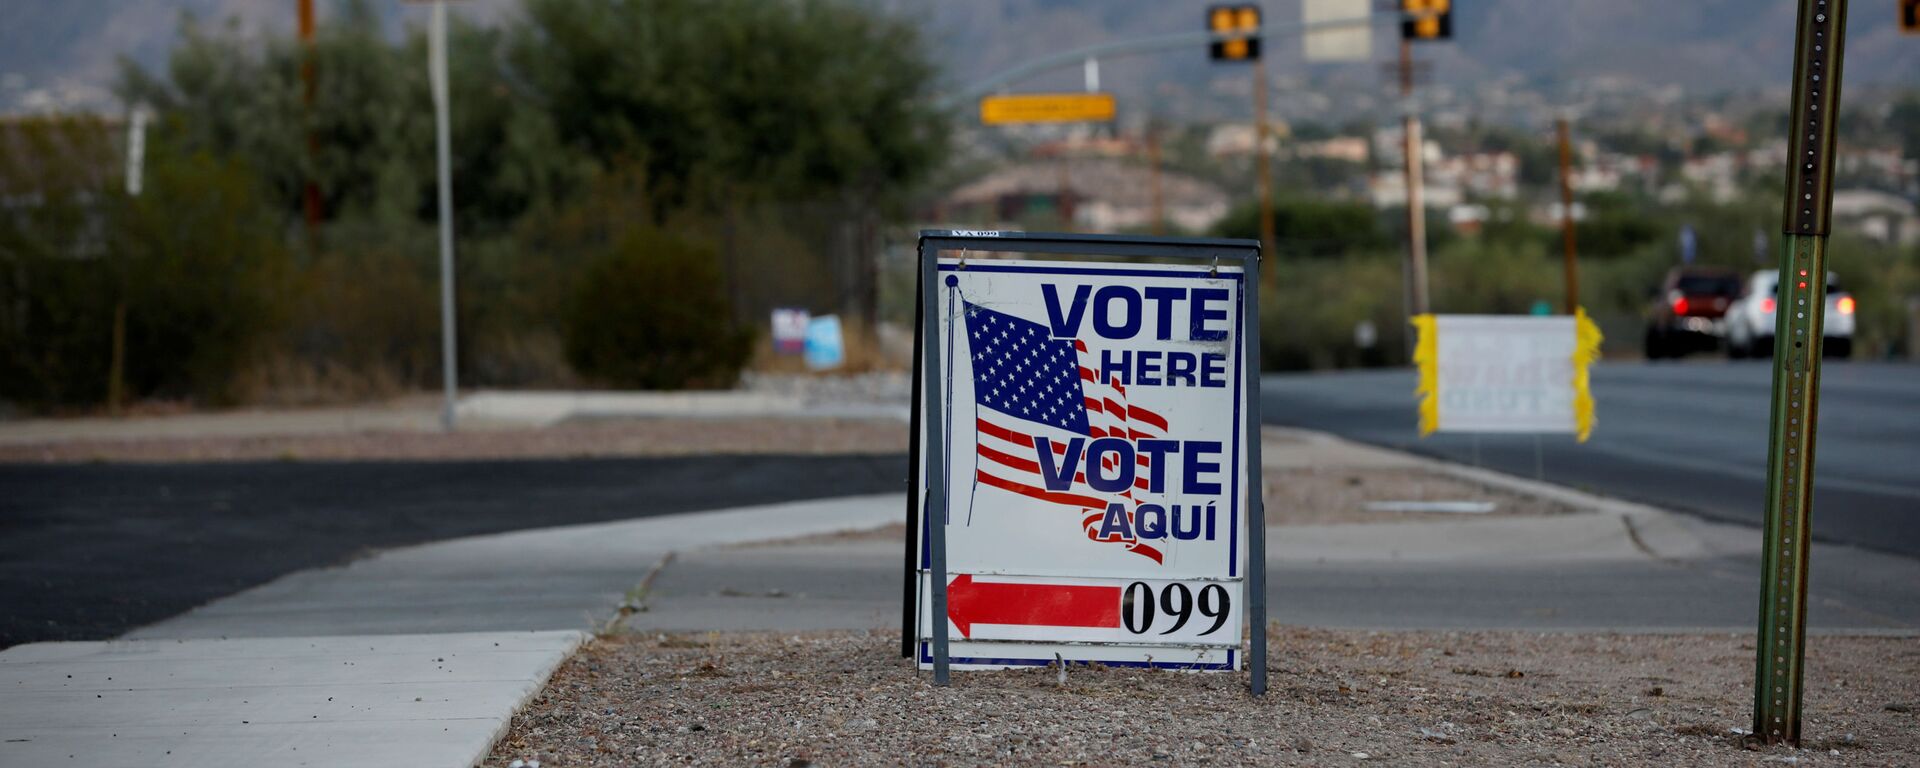 Sign directs voters to a polling station on Election Day in Tucson, Arizona, U.S. November 3, 2020 - Sputnik International, 1920, 07.10.2021